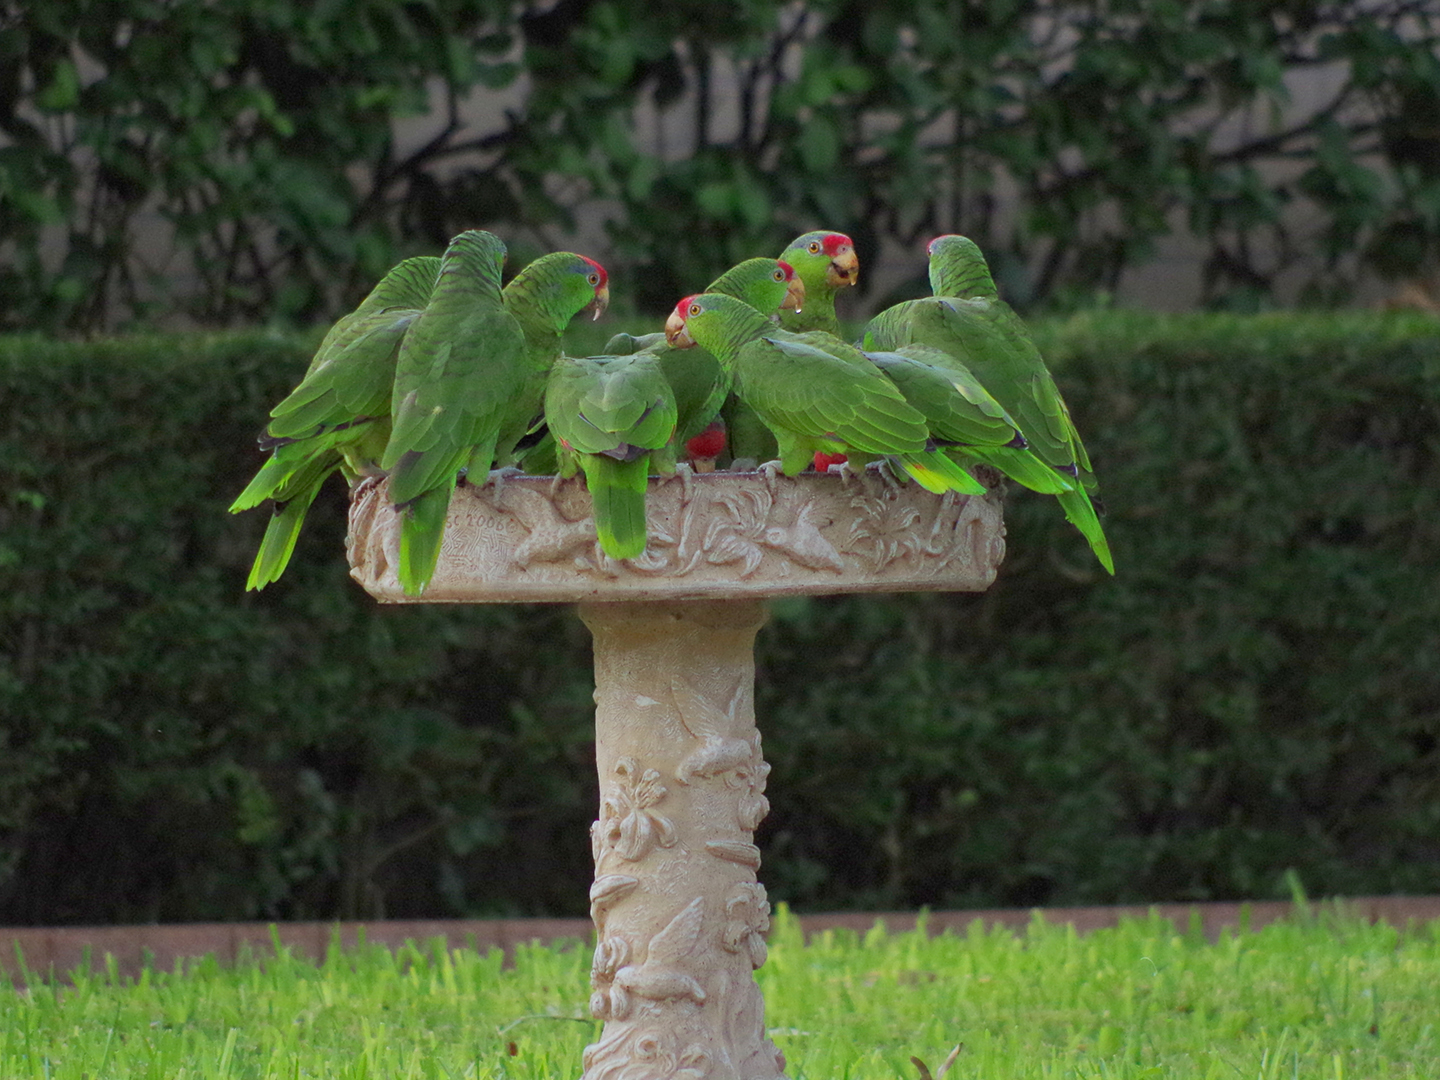 A group of red-crowned parrots sitting on a bird bath